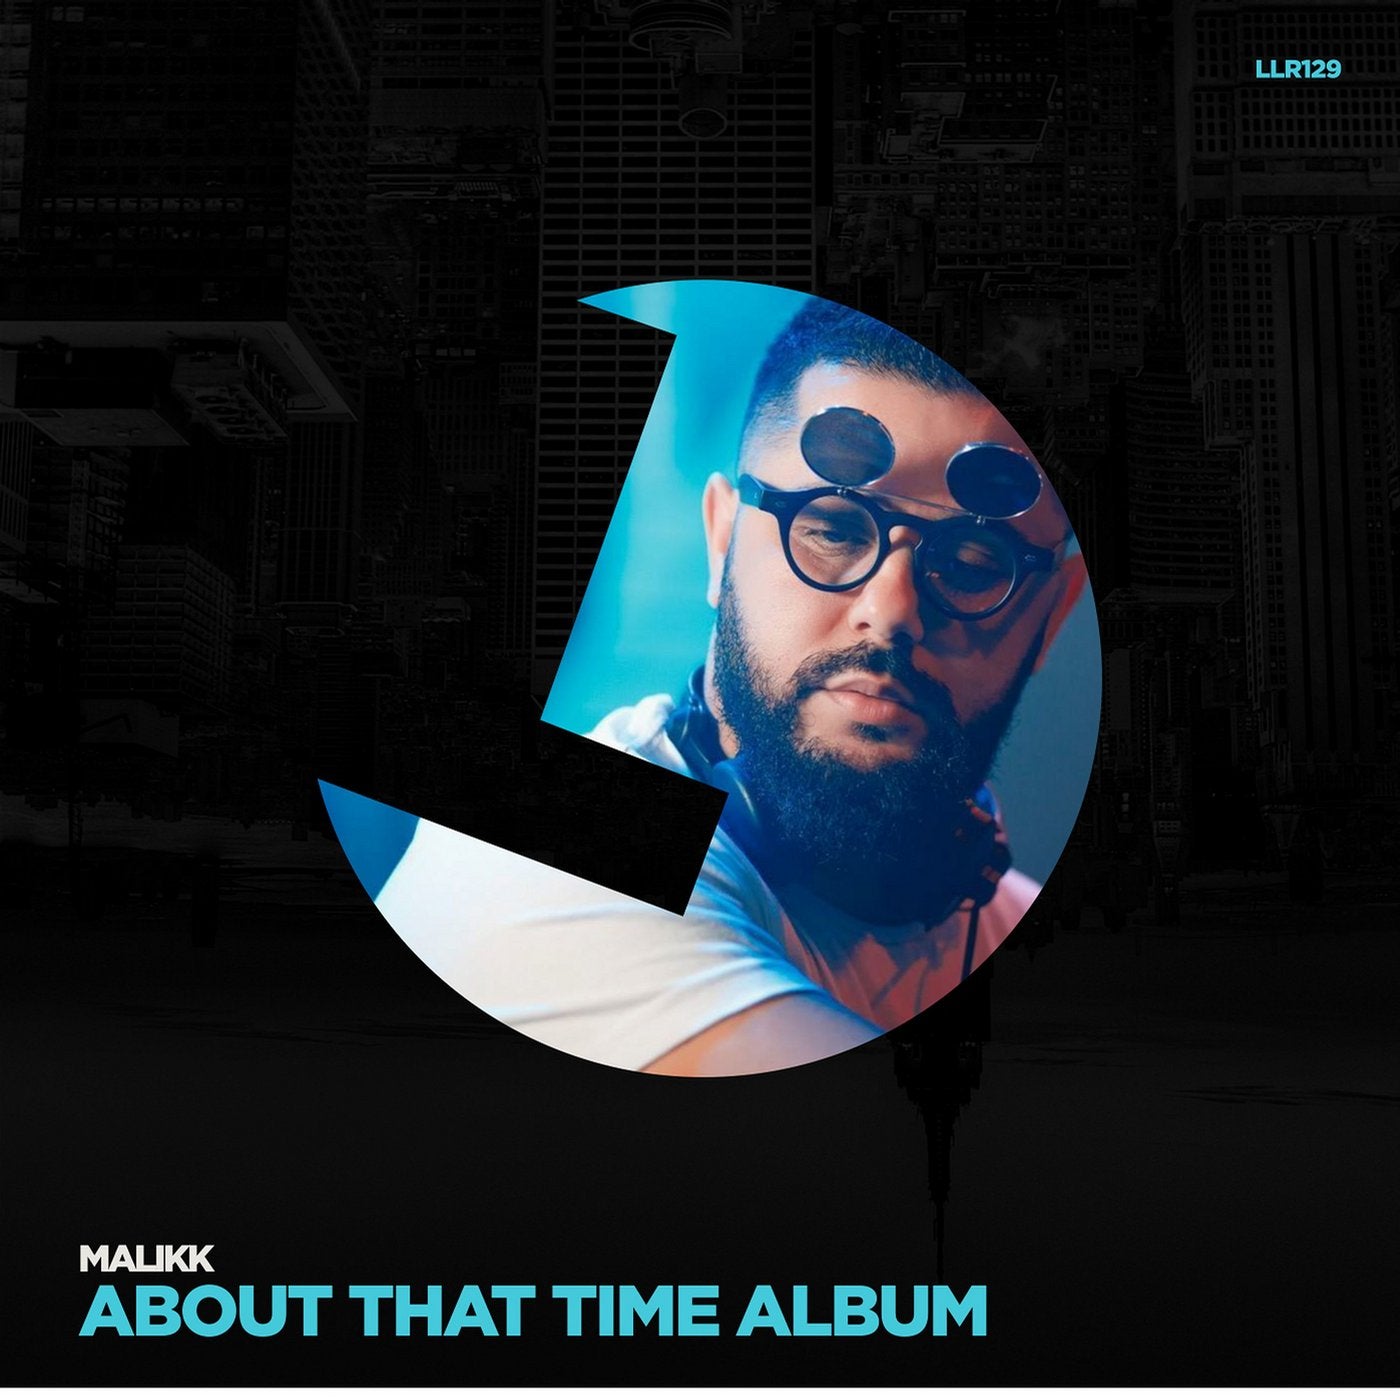 About That Time Album